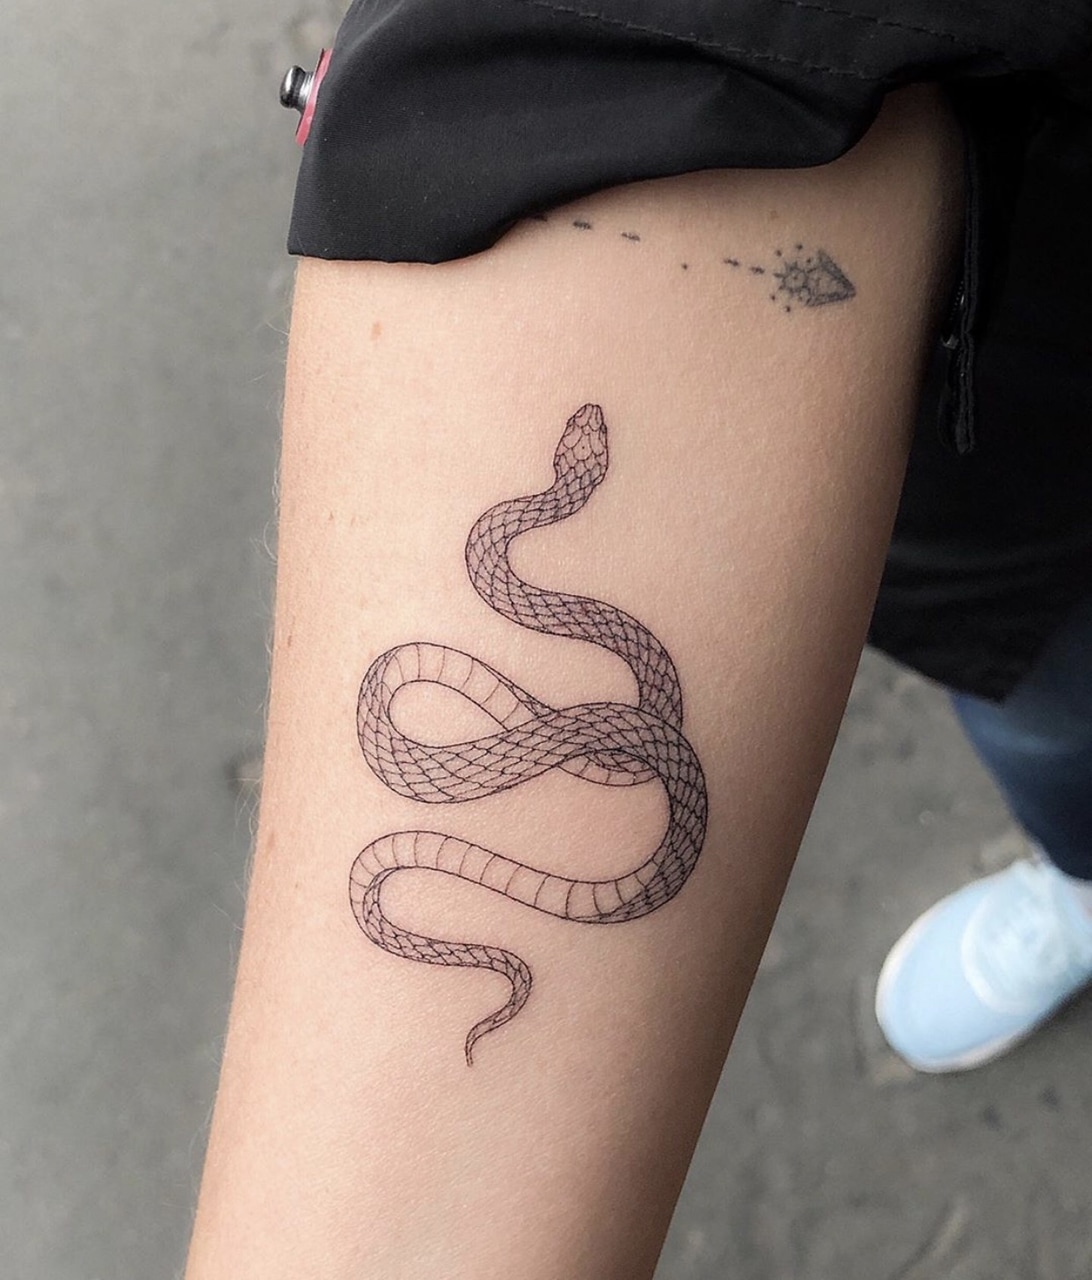 91+ Best Snake Tattoo in 2020 That Will Make You Fall in Love